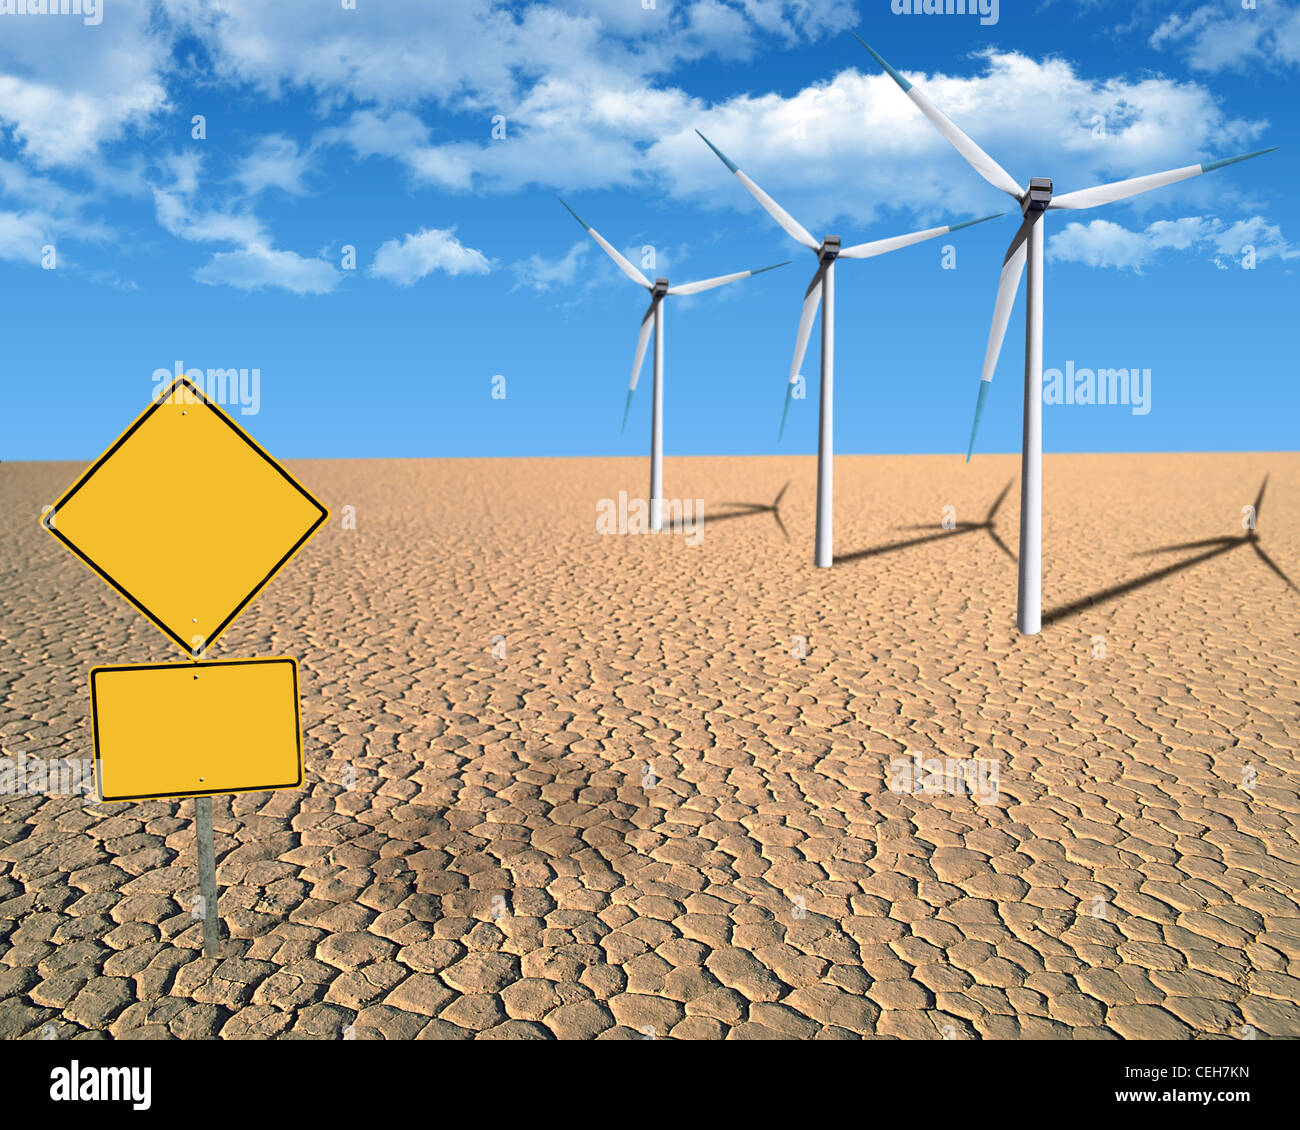 Wind turbines in desert and yellow sign. Stock Photo